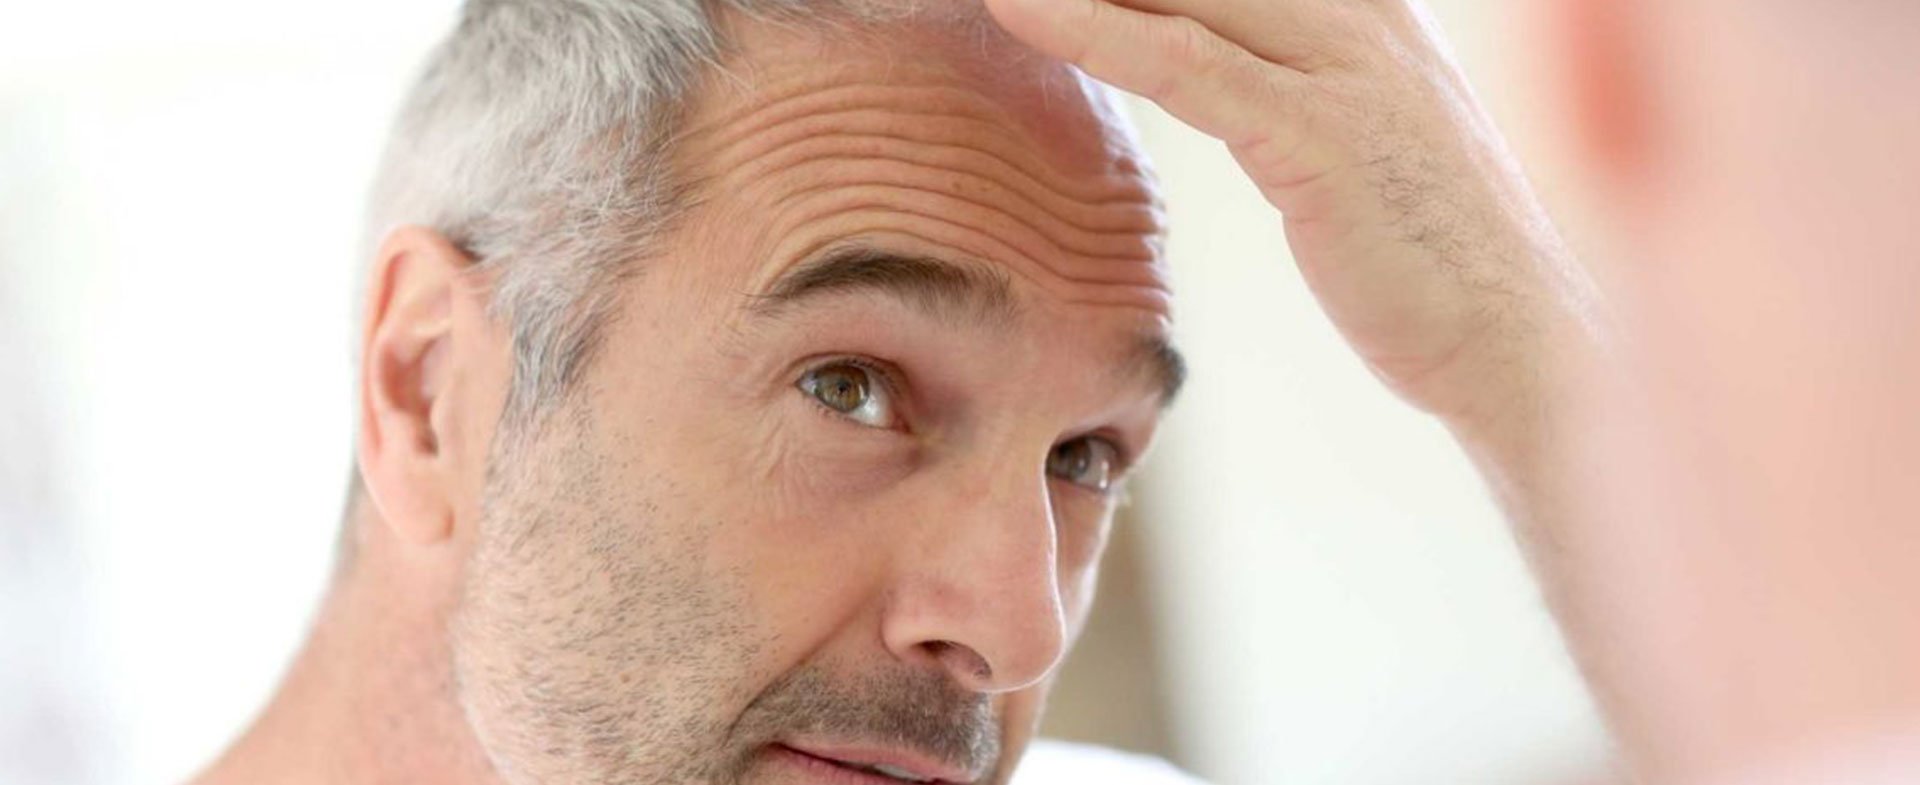 Is This New Solution For Hair Loss Right For You? | Henry Ford Health -  Detroit, MI